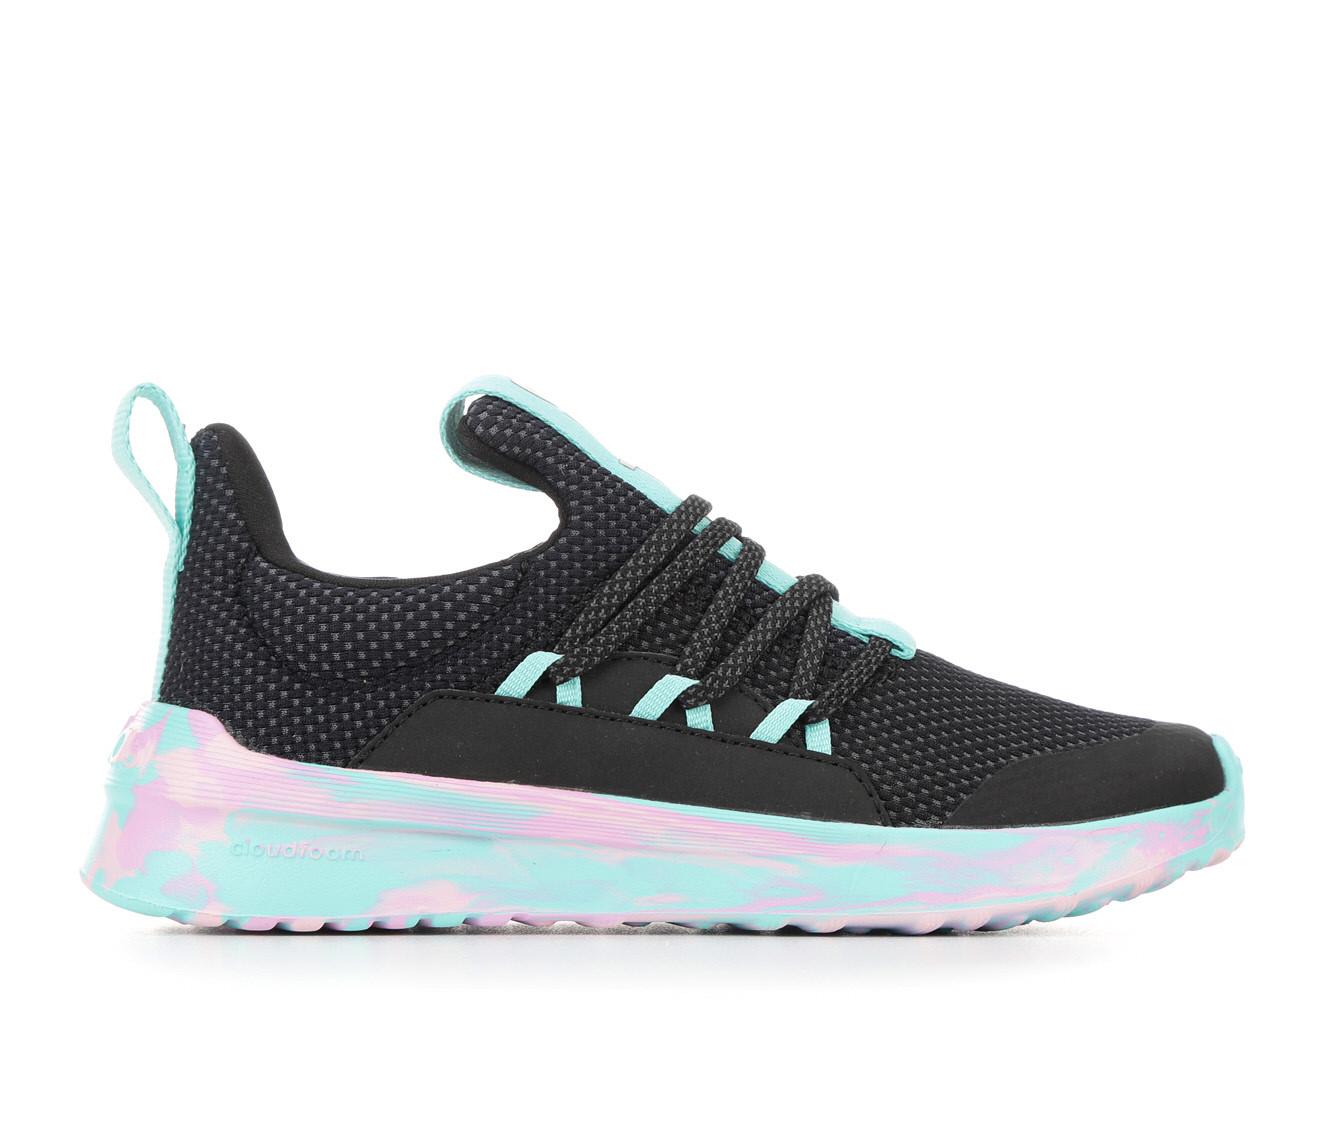 Kids' Athletic Shoes, Children's Sneakers